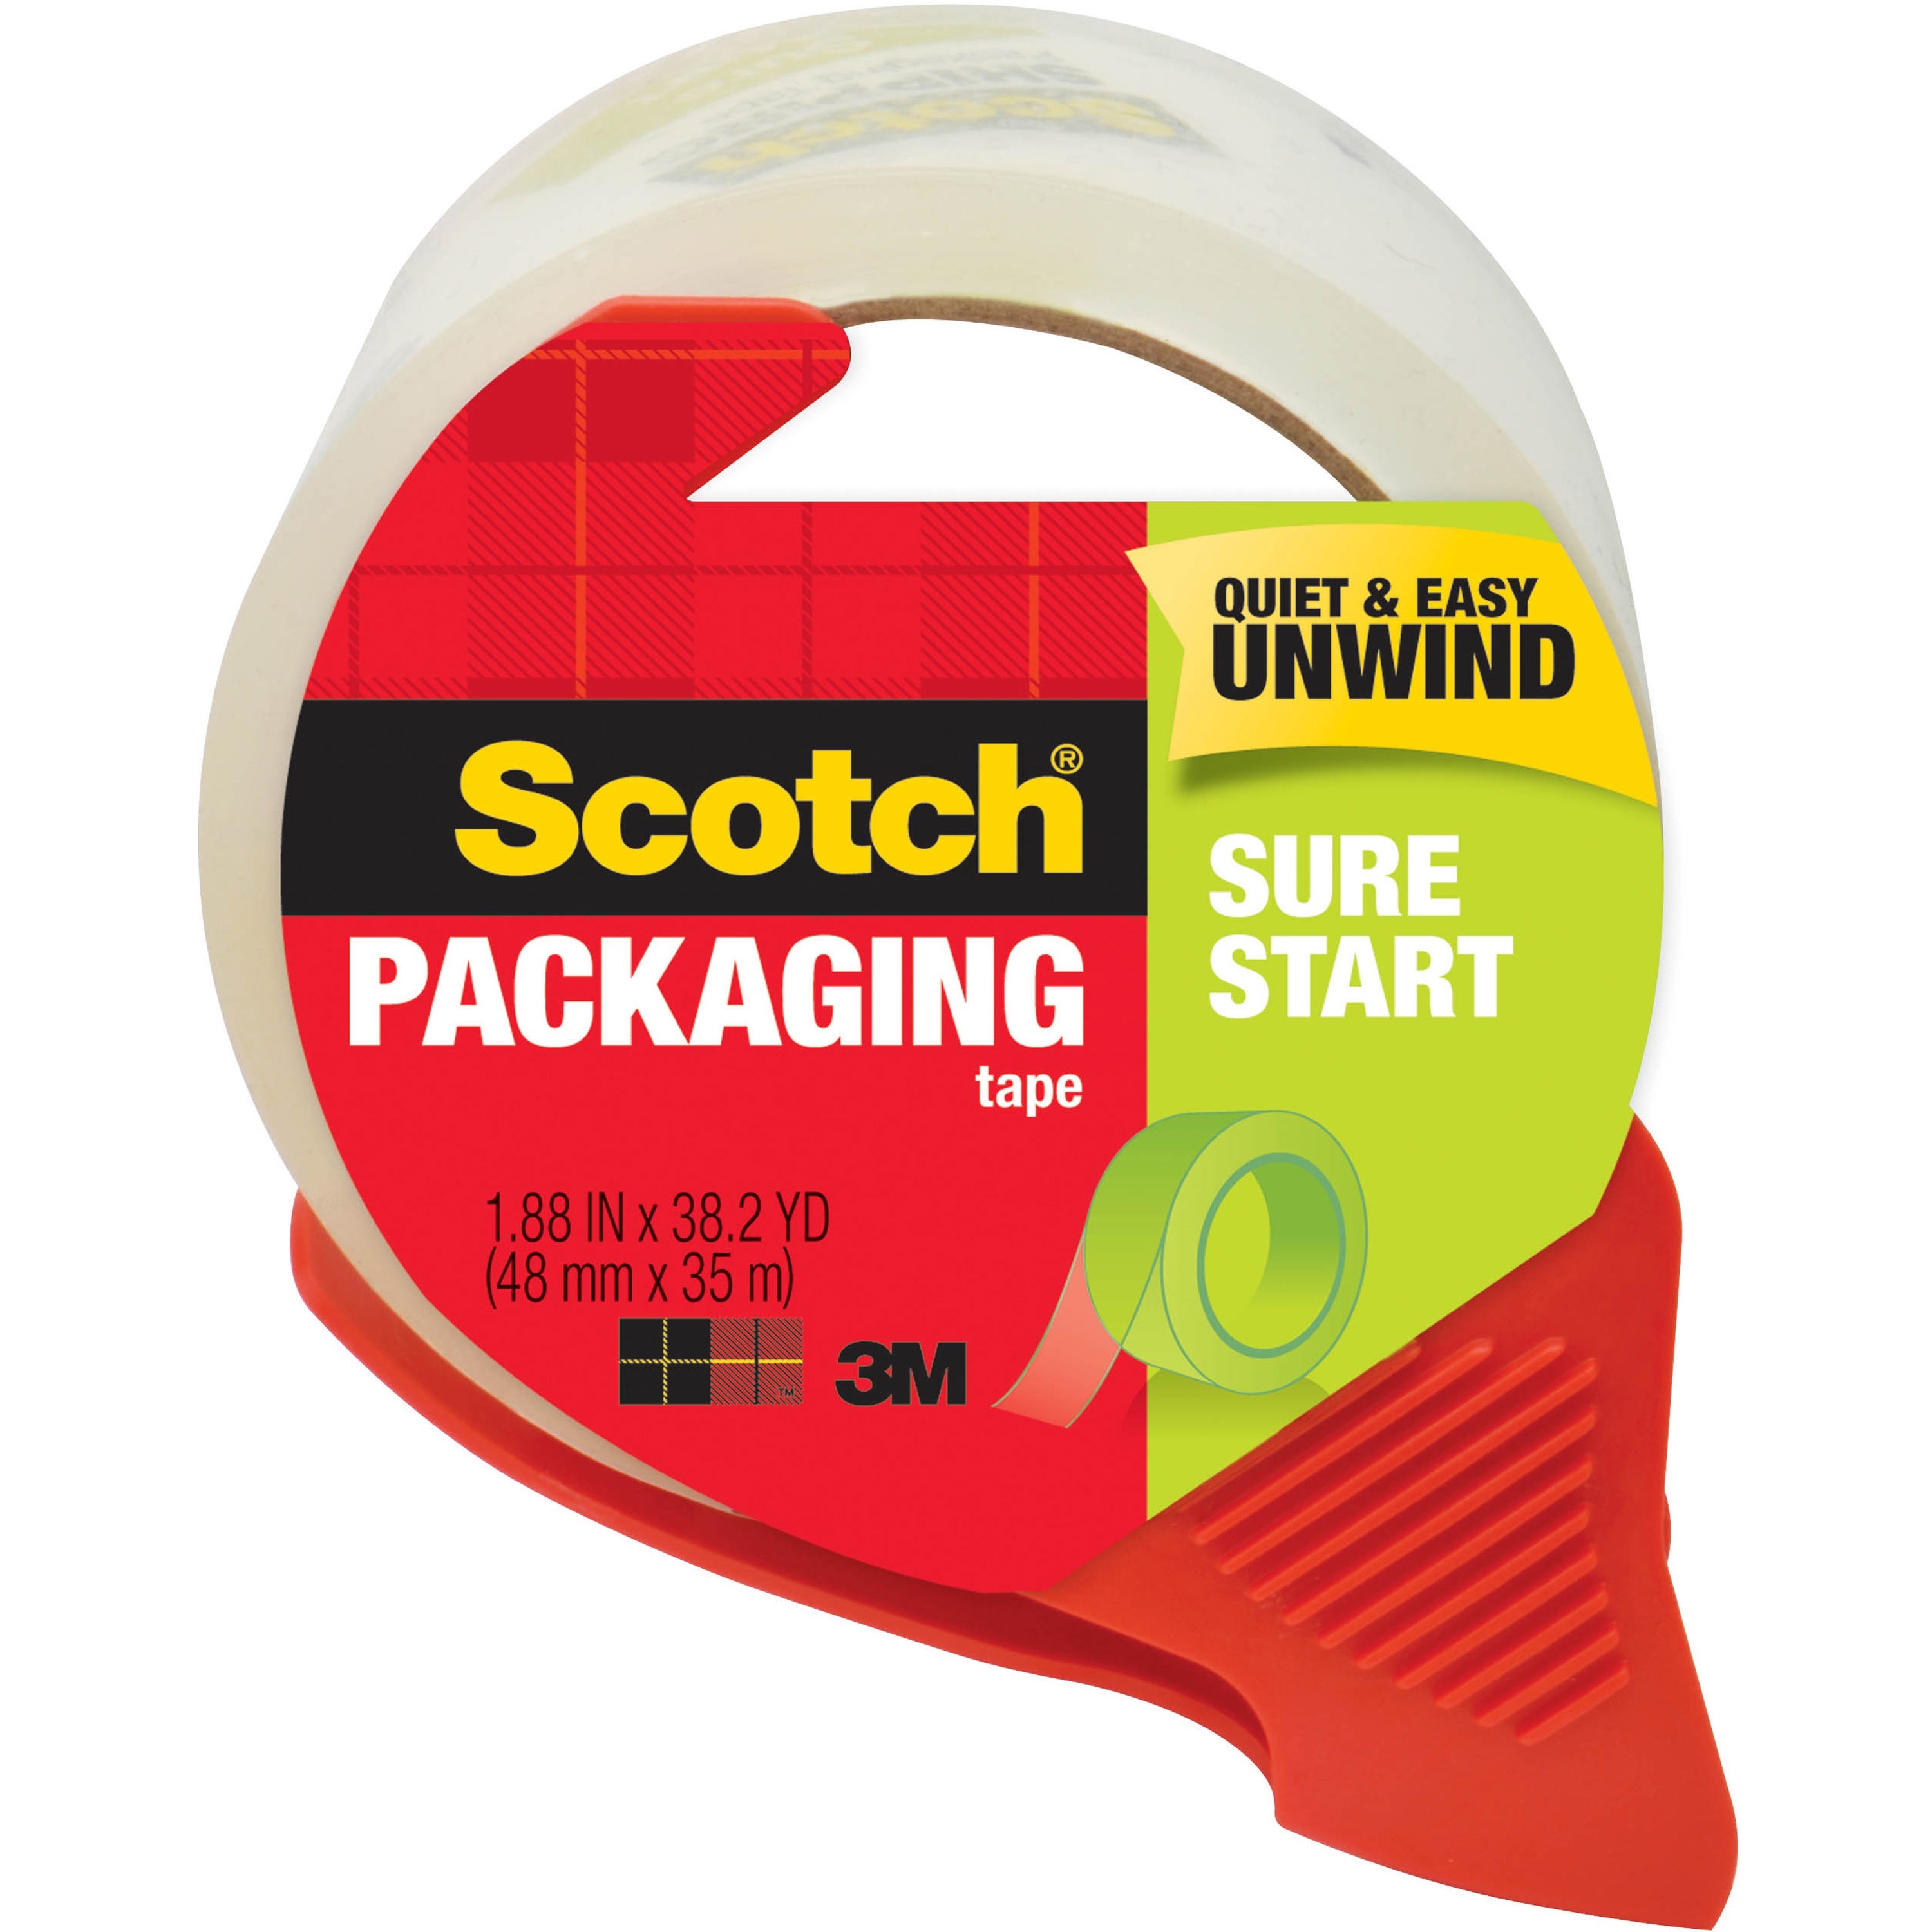 Scotch Sure Start Packaging Tape 38.20 yd Length x 1.88